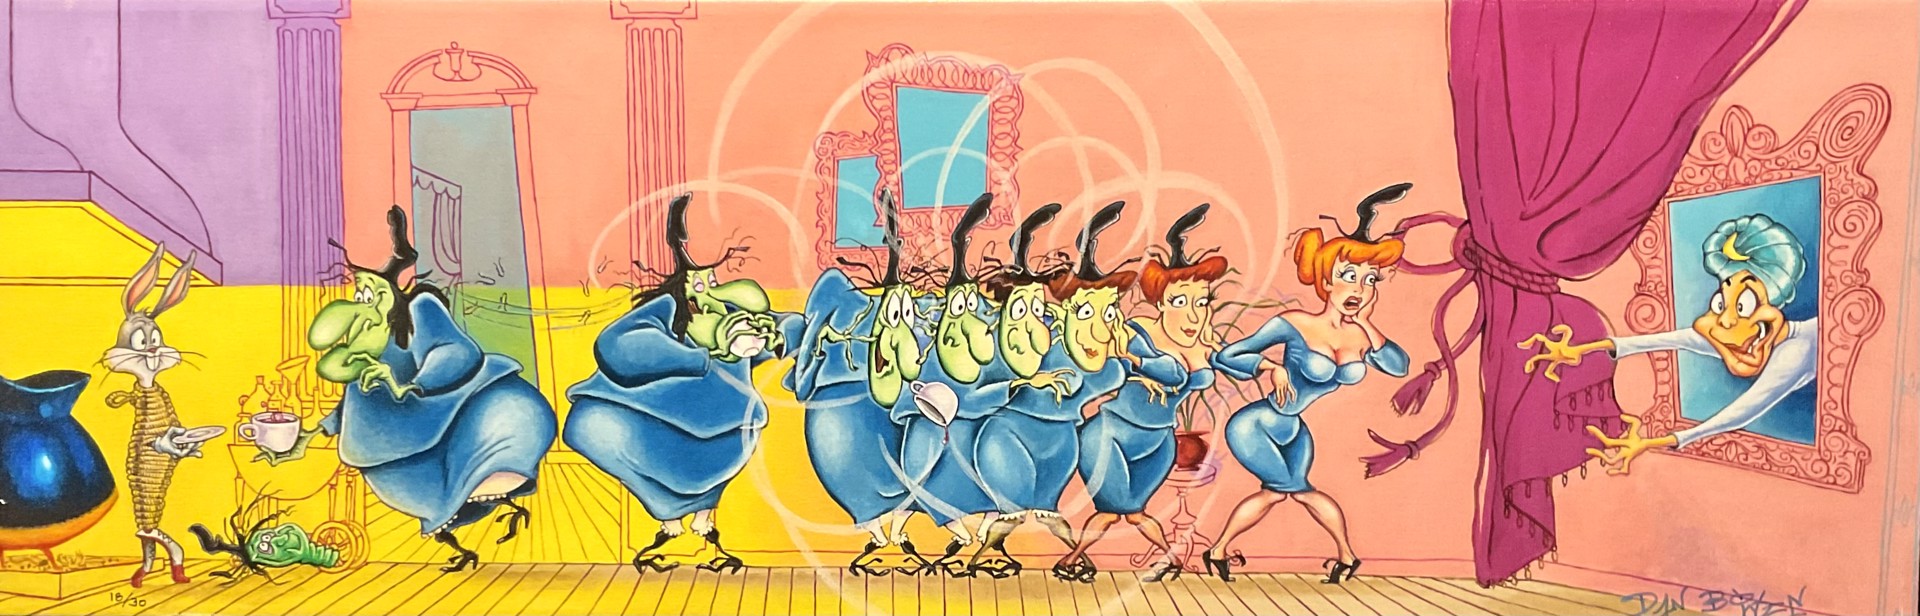 Who Is the Ugliest of them All? by Dan Bowden (Chuck Jones Collection)